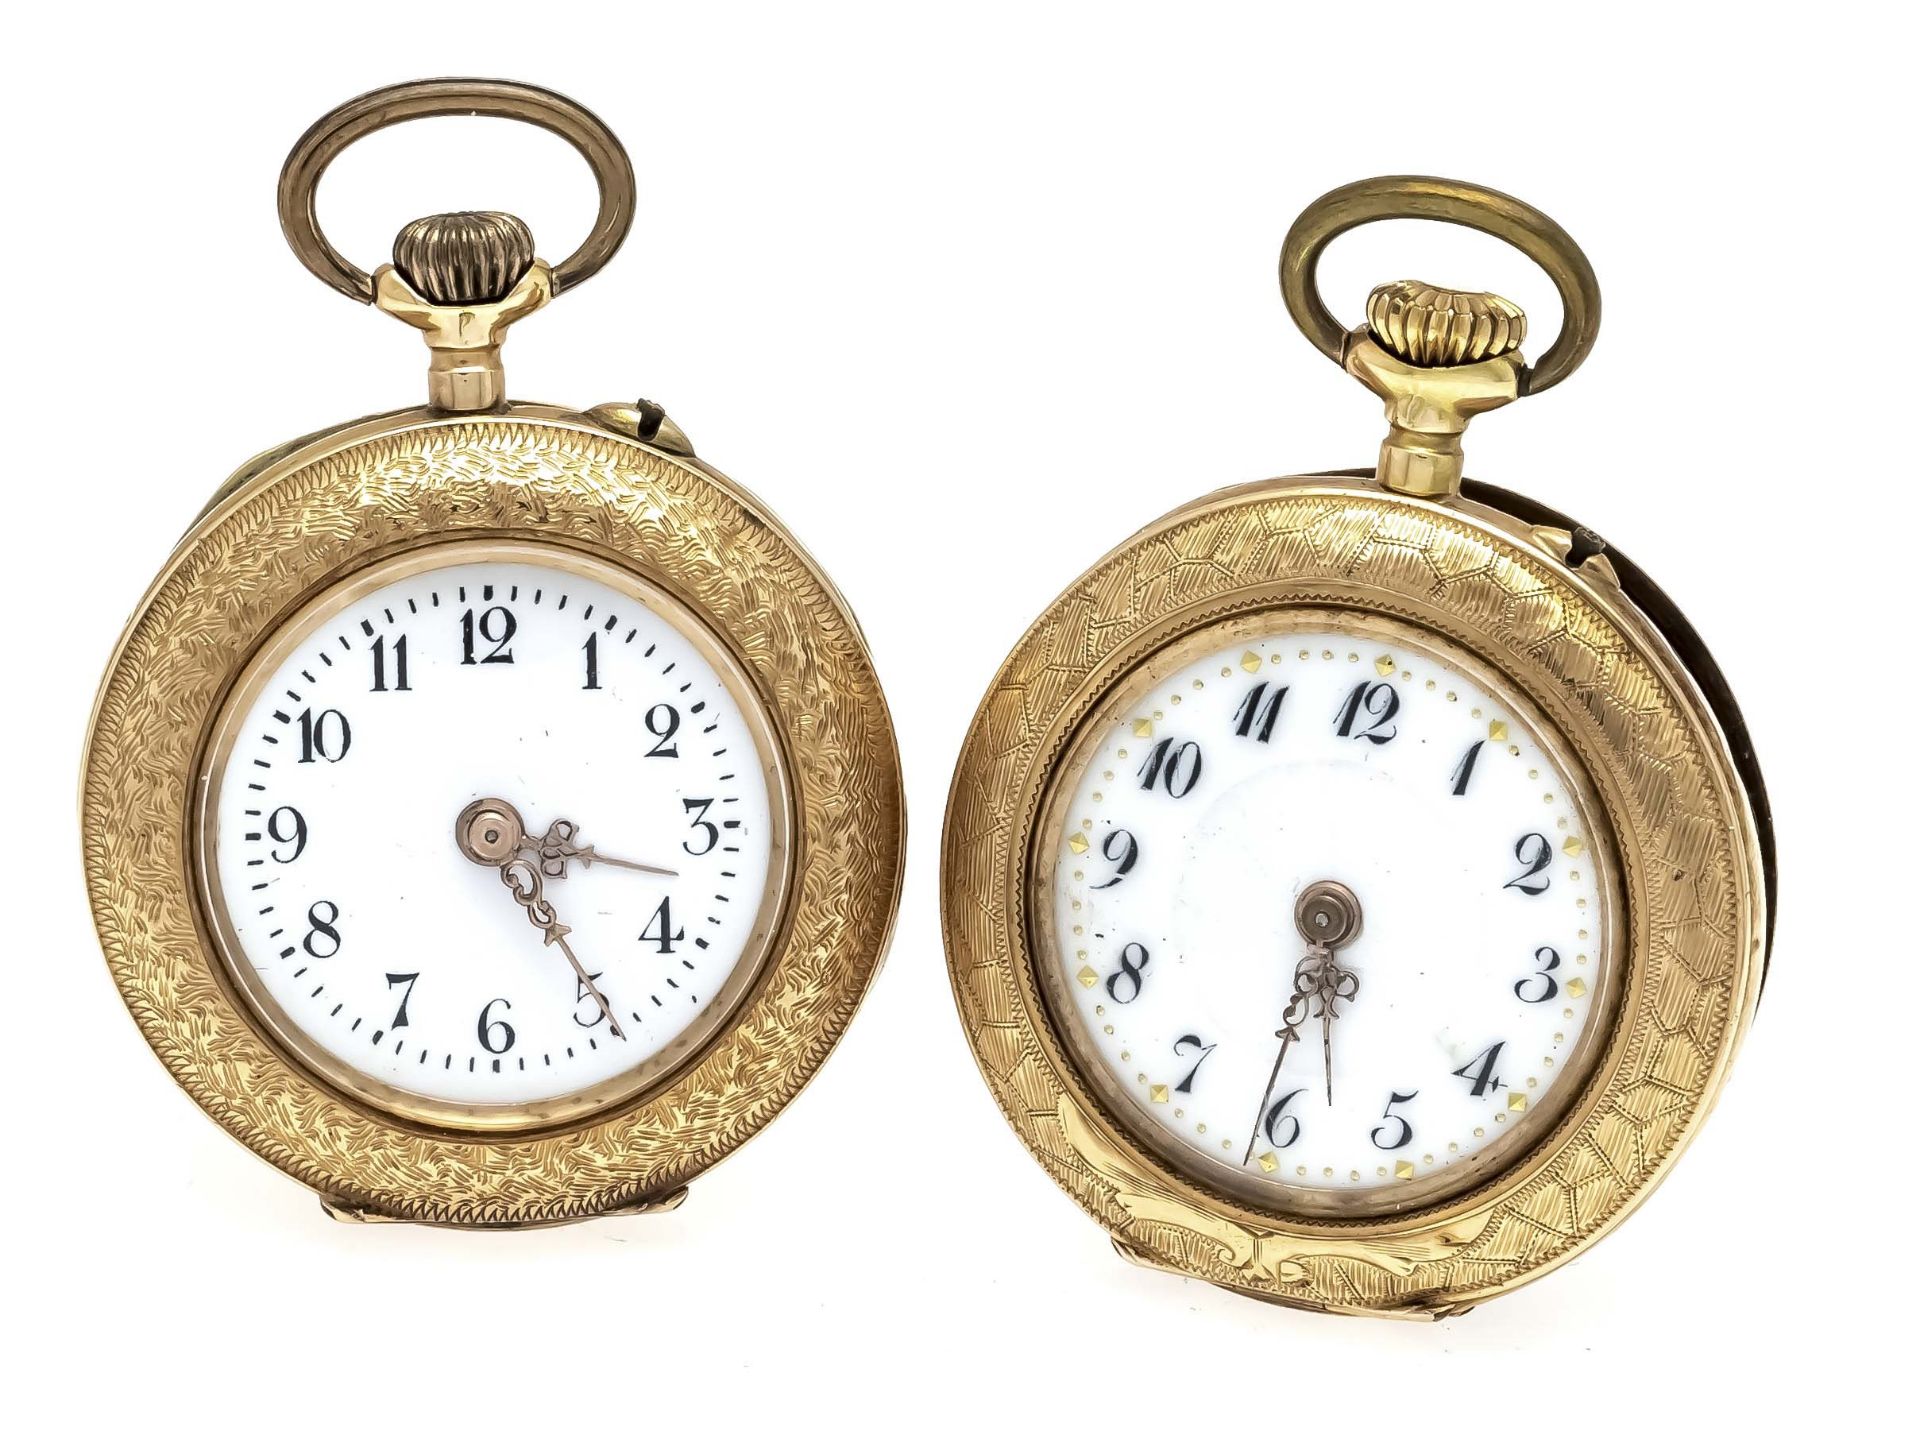 2 ladies' watches each 1 cover 585/000 GG, one with floral enamel motif, cylinder movements start,